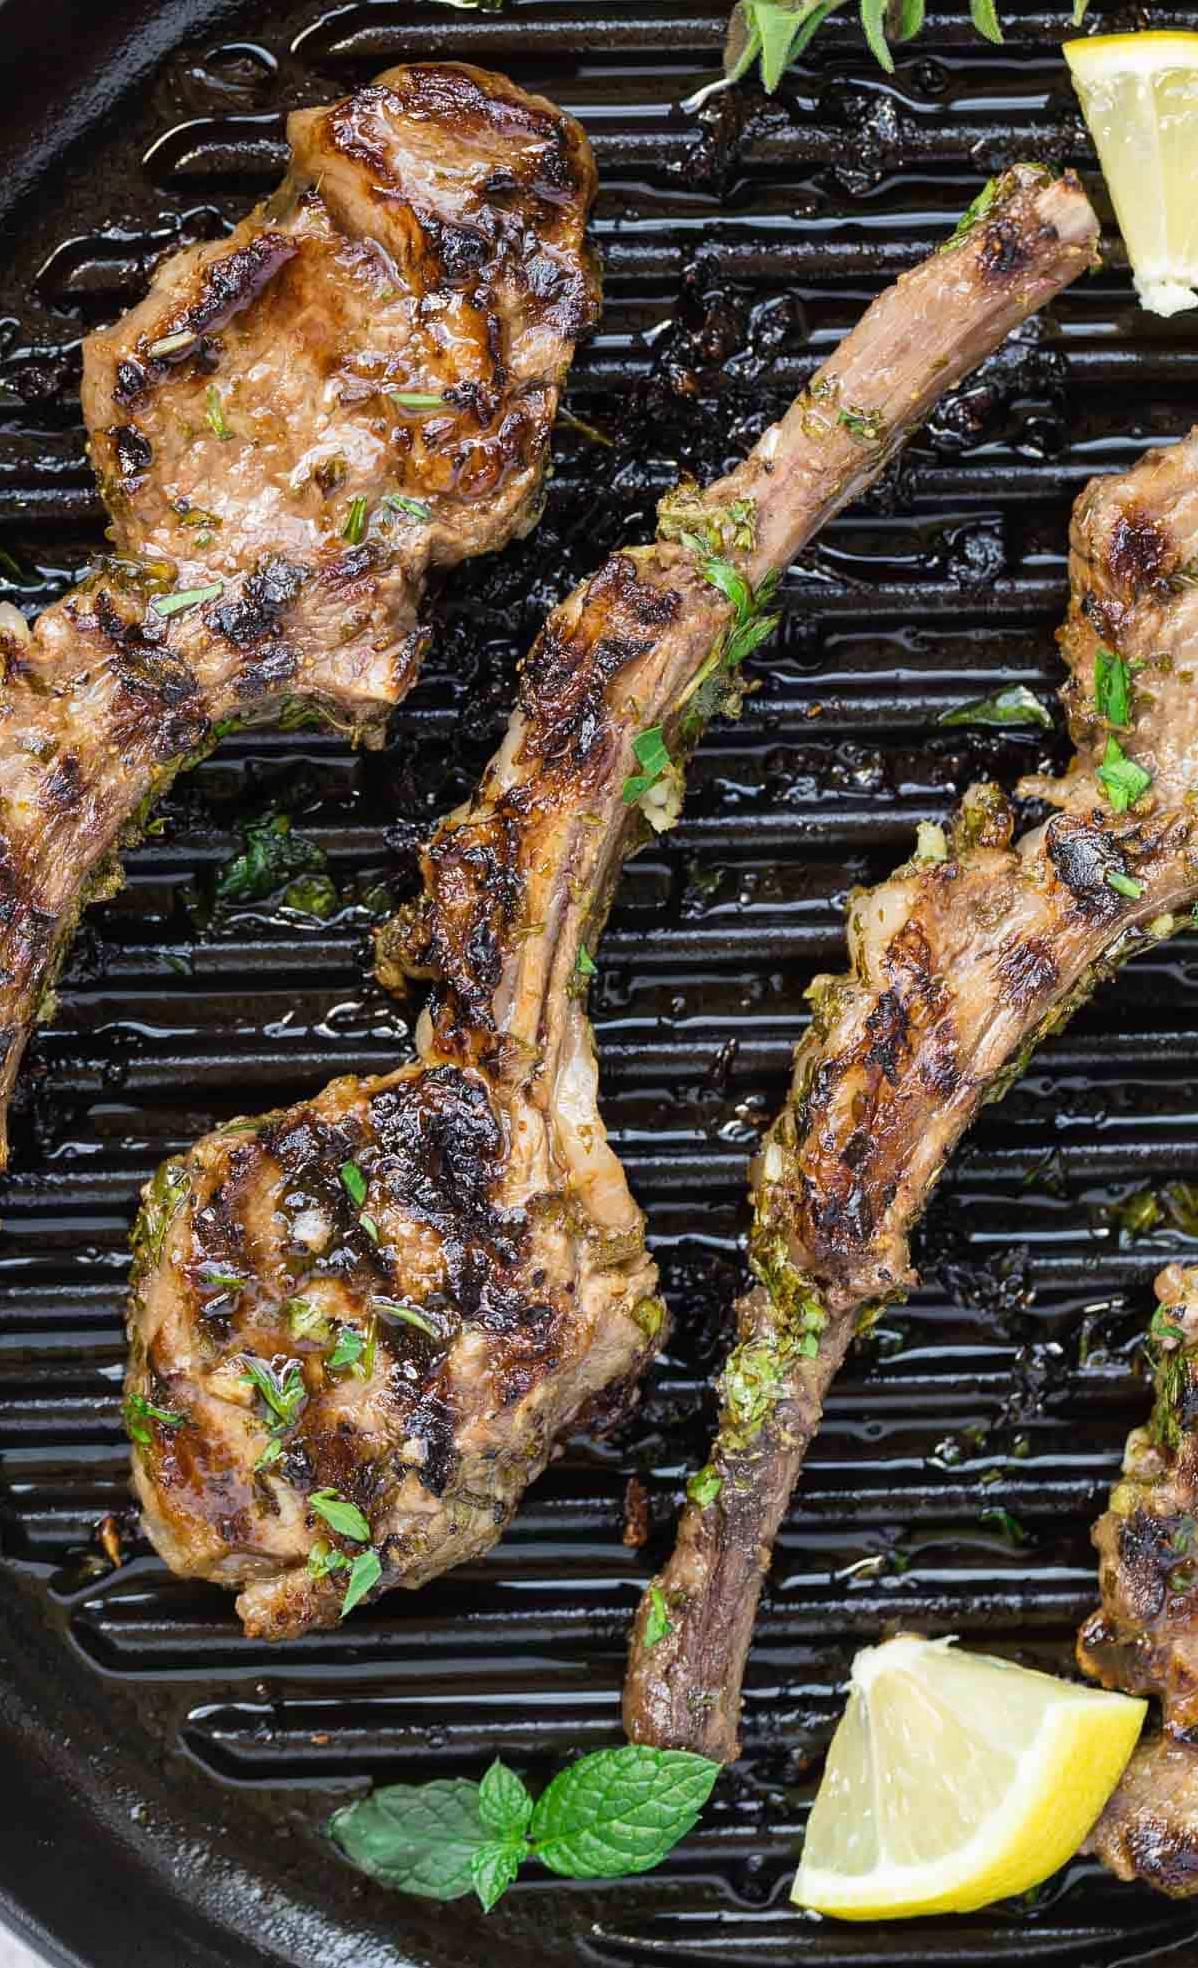  A great source of protein and essential nutrients, these lamb chops pack a nutritious punch!